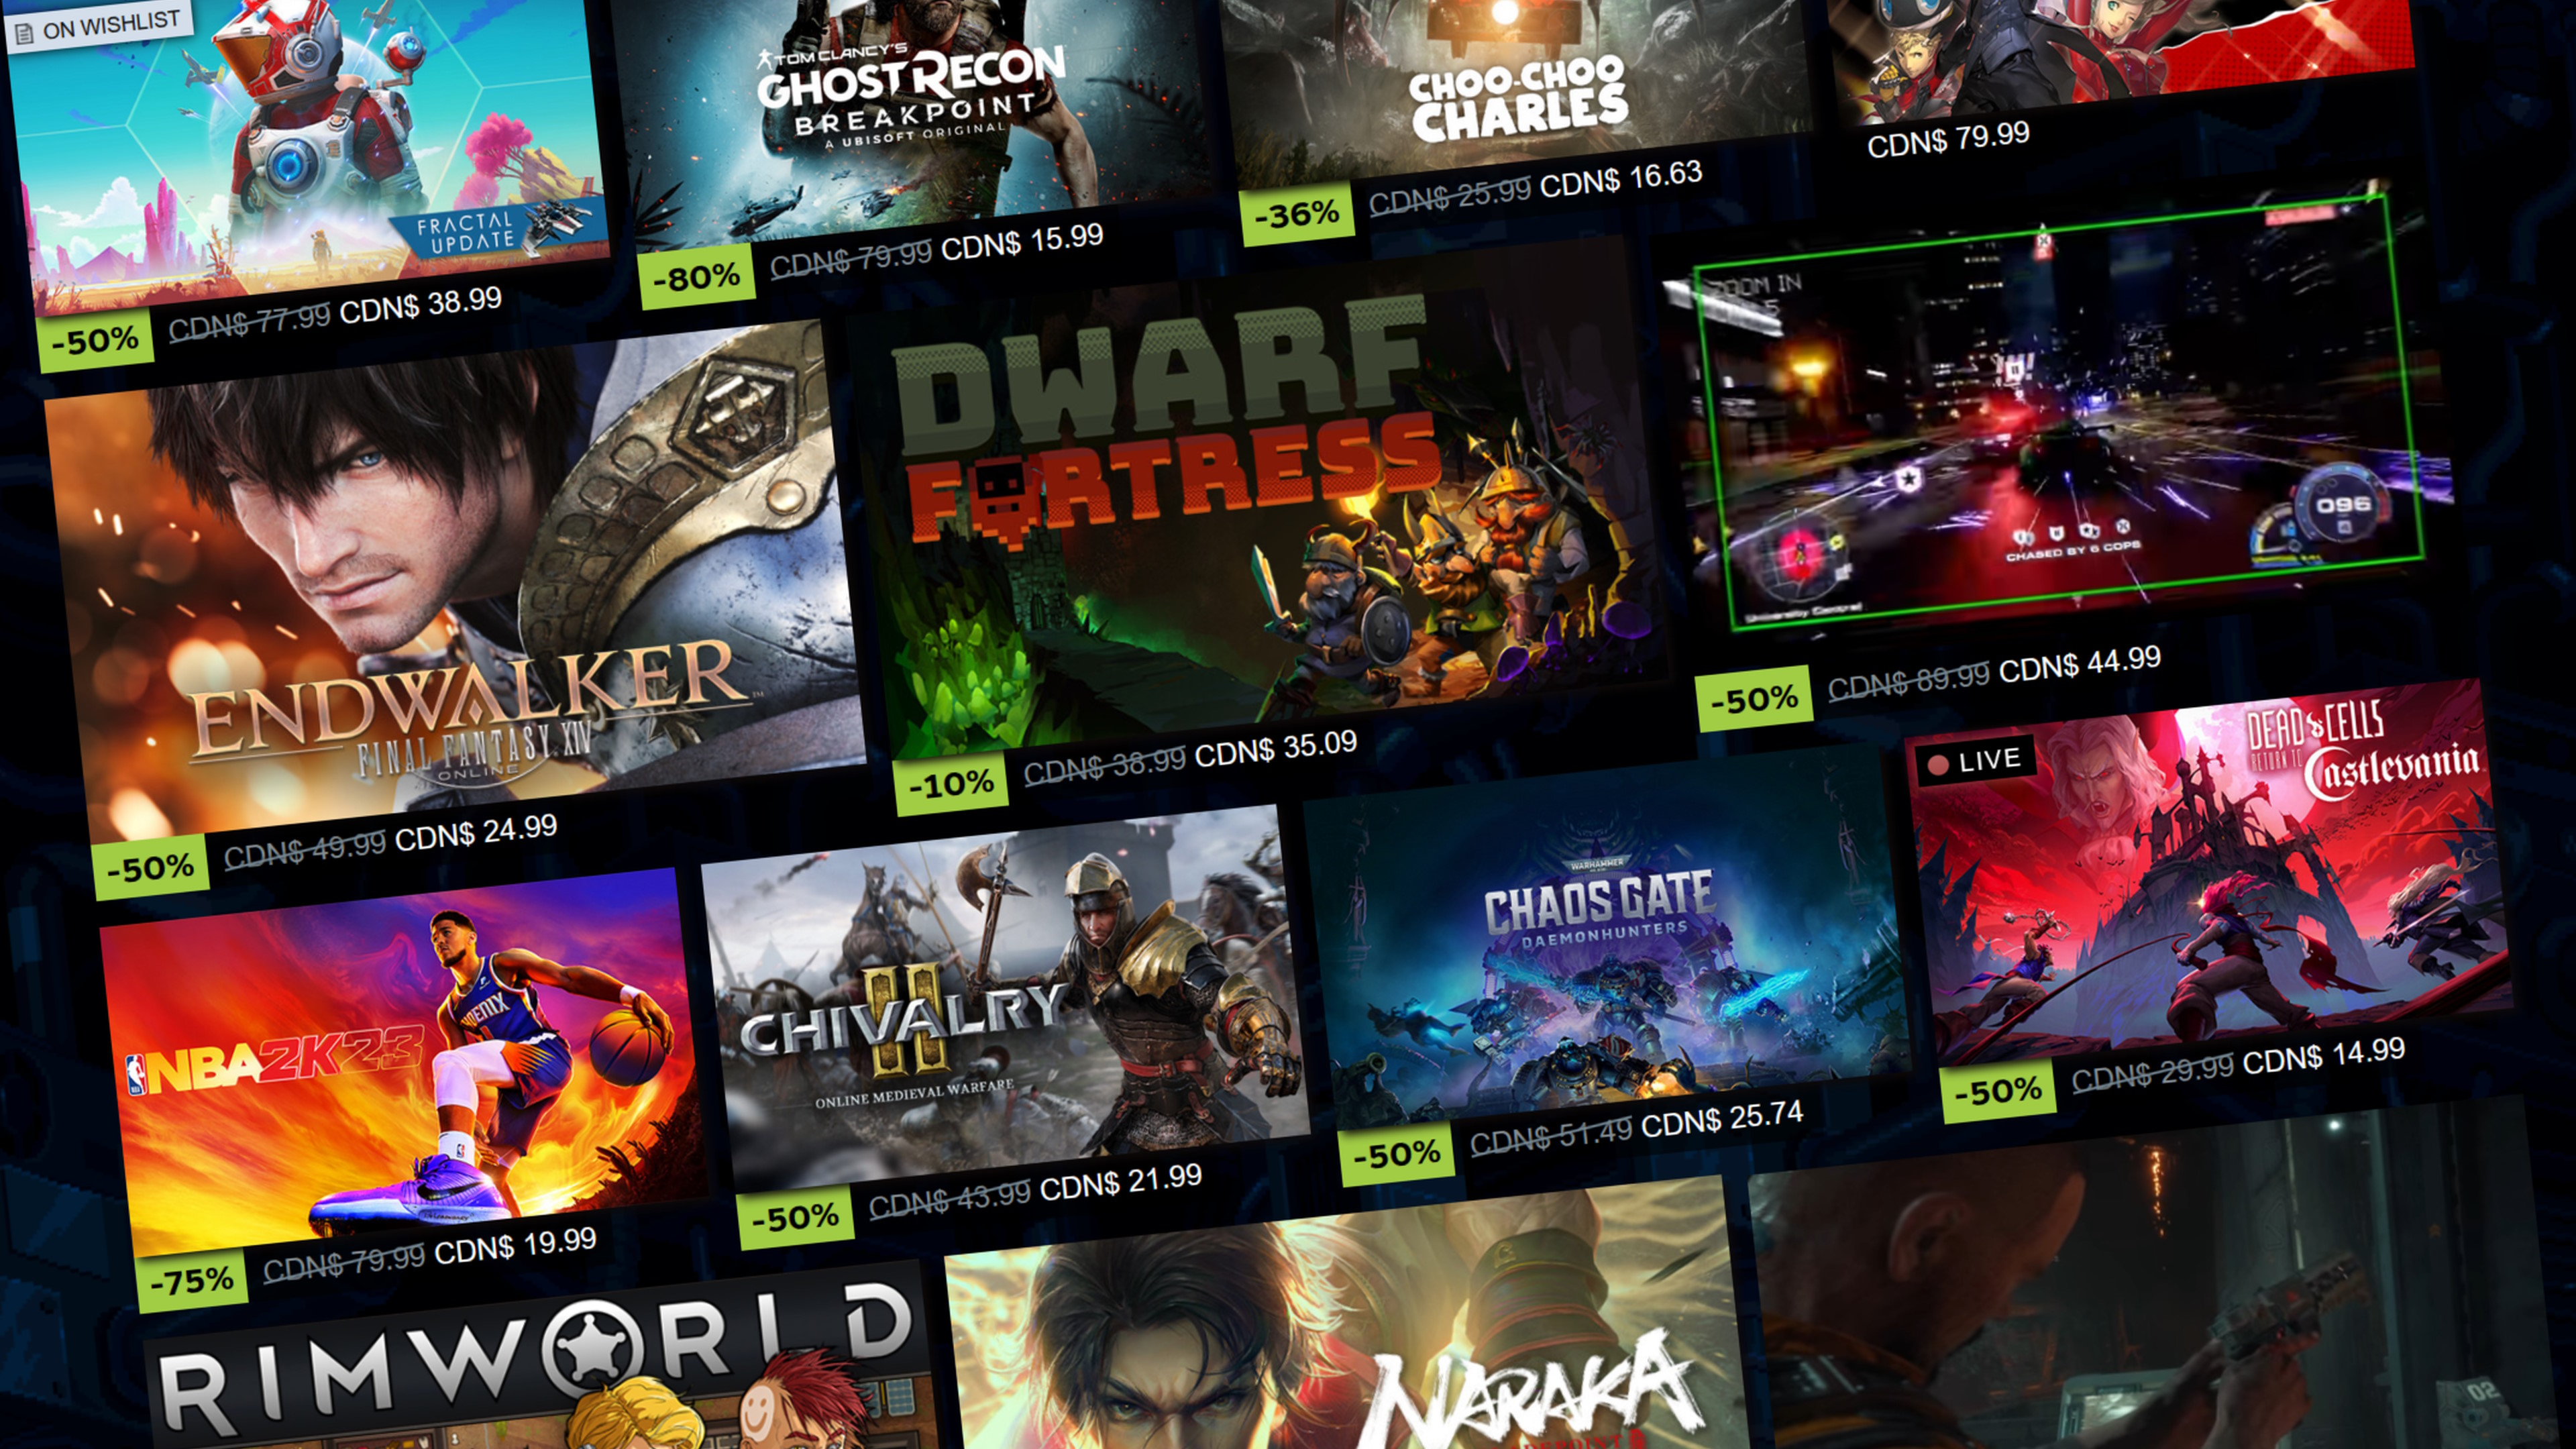 Steam Says Goodbye To Its Stats Page And Replaces It With Real